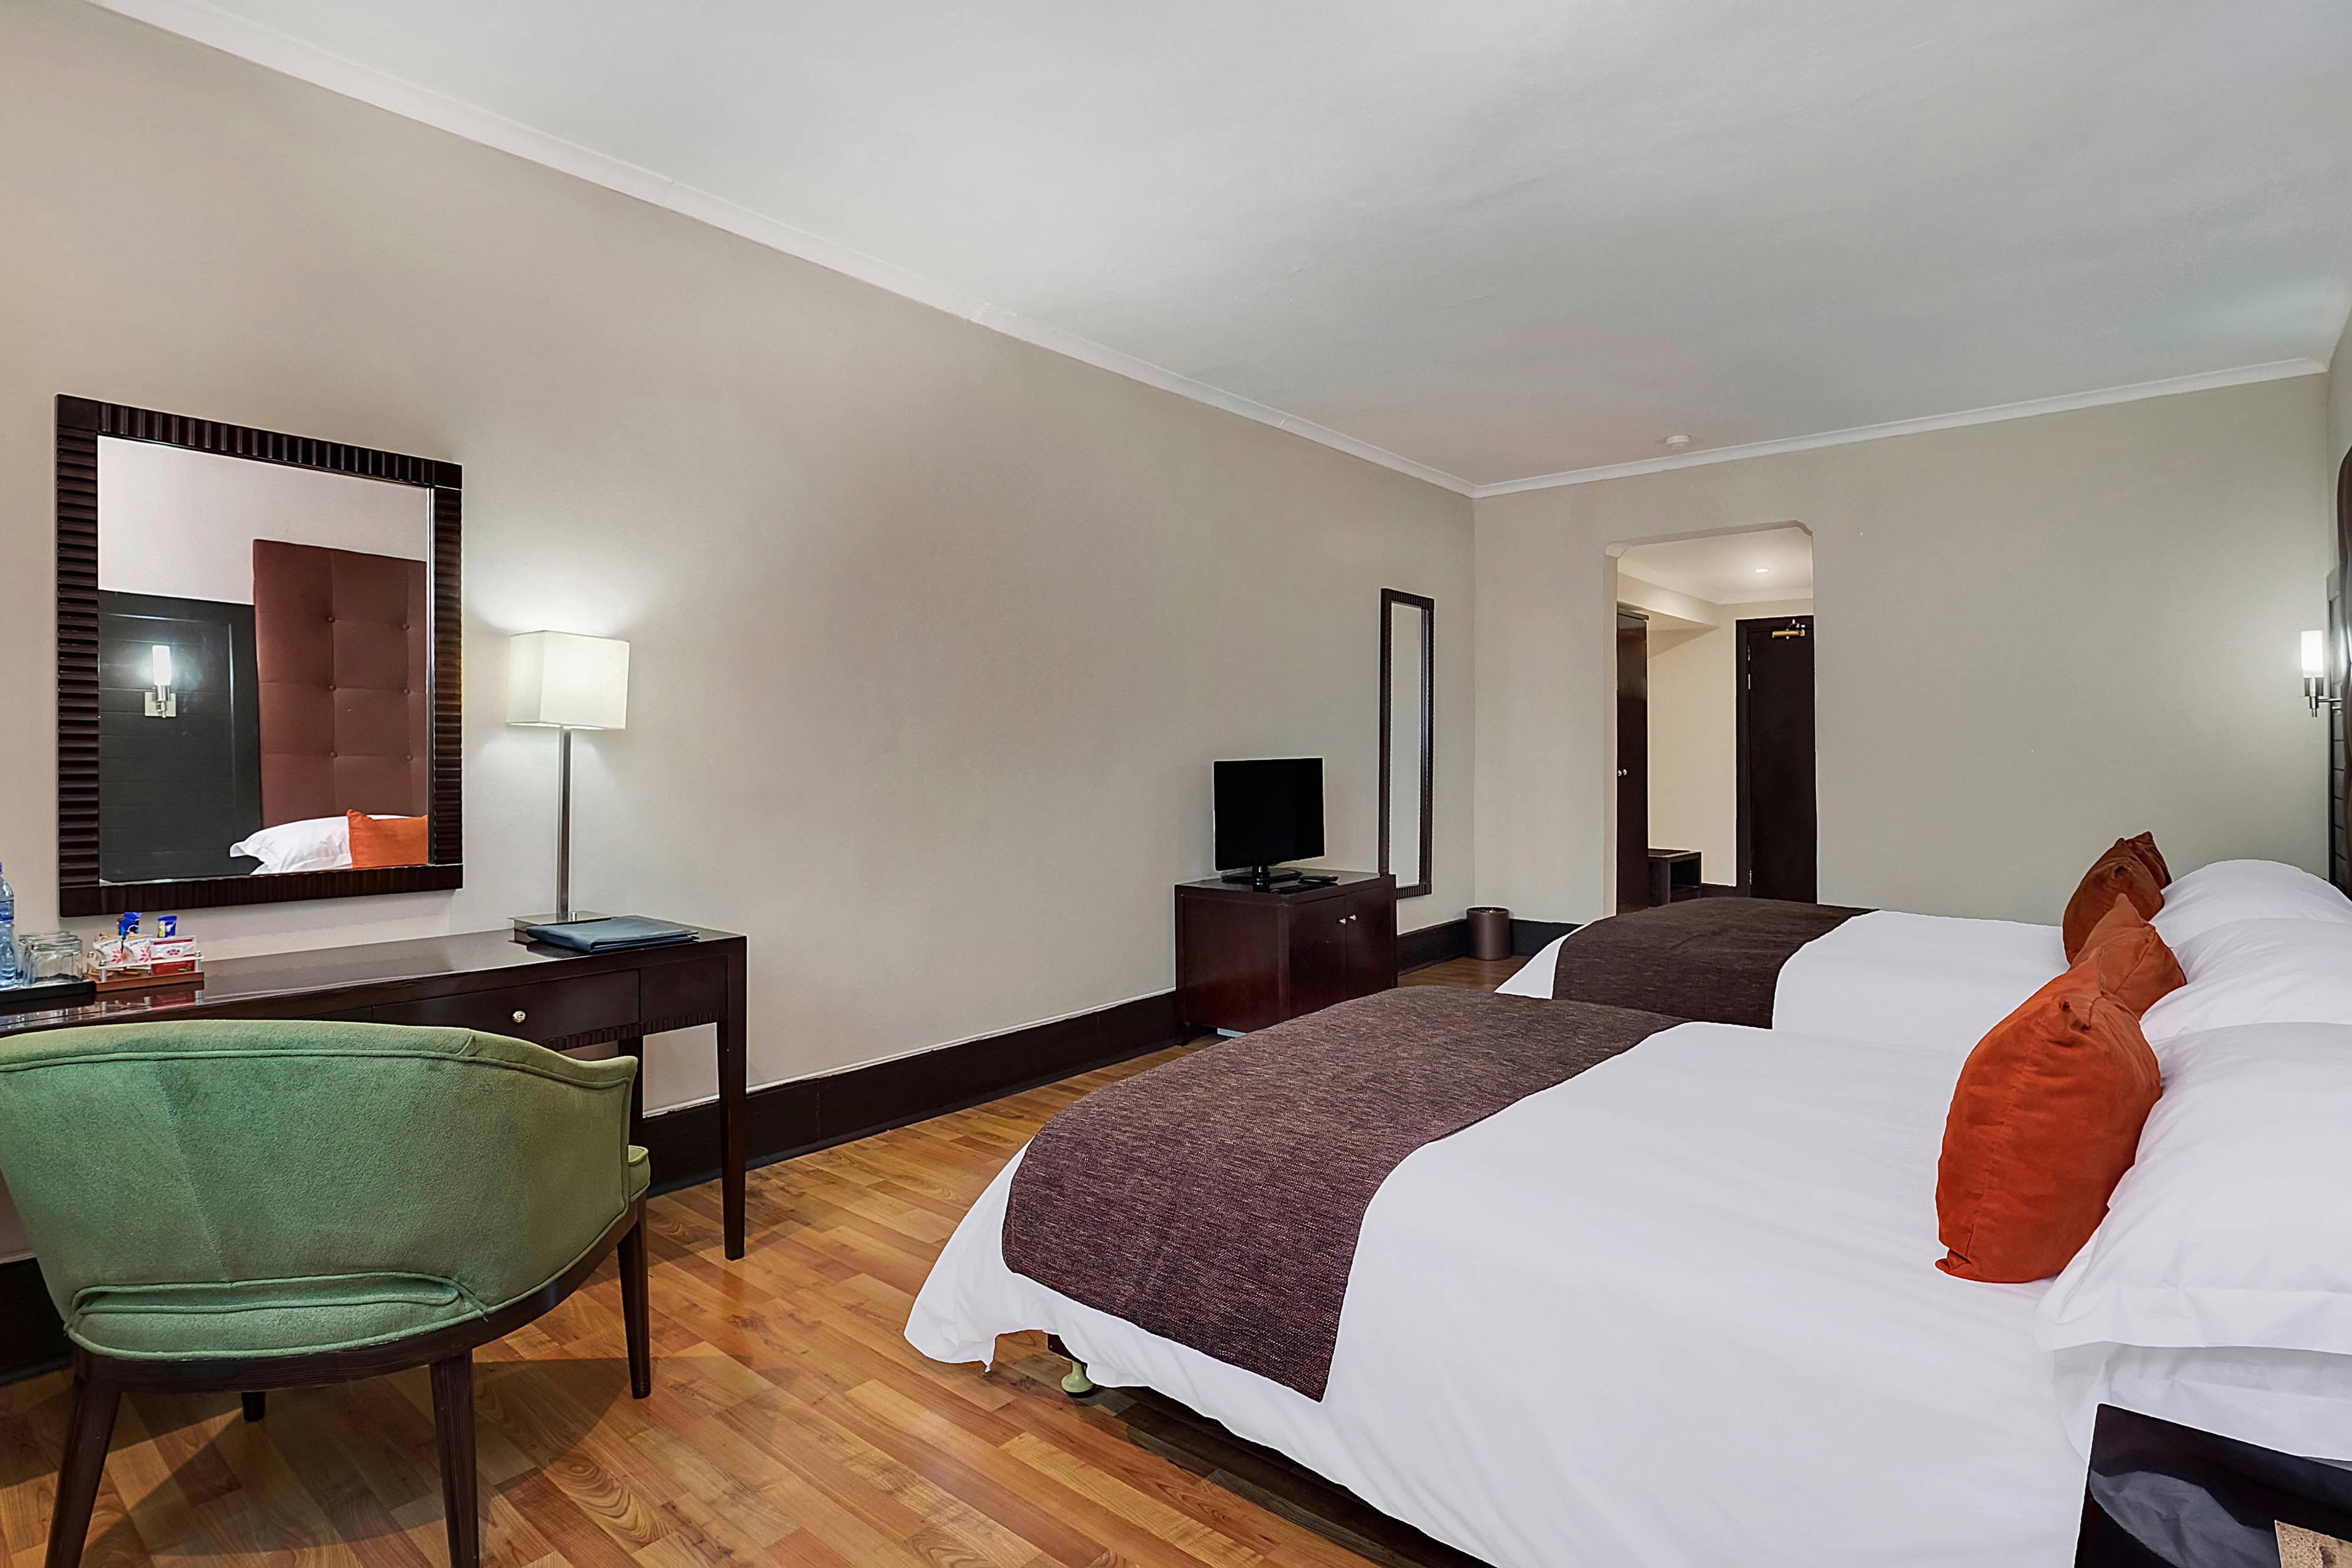 Relax and unwind in one of our comfortable queen/queen guest rooms. These spacious rooms feature a flat-screen TV, coffee and tea maker and an ergonomic work desk.